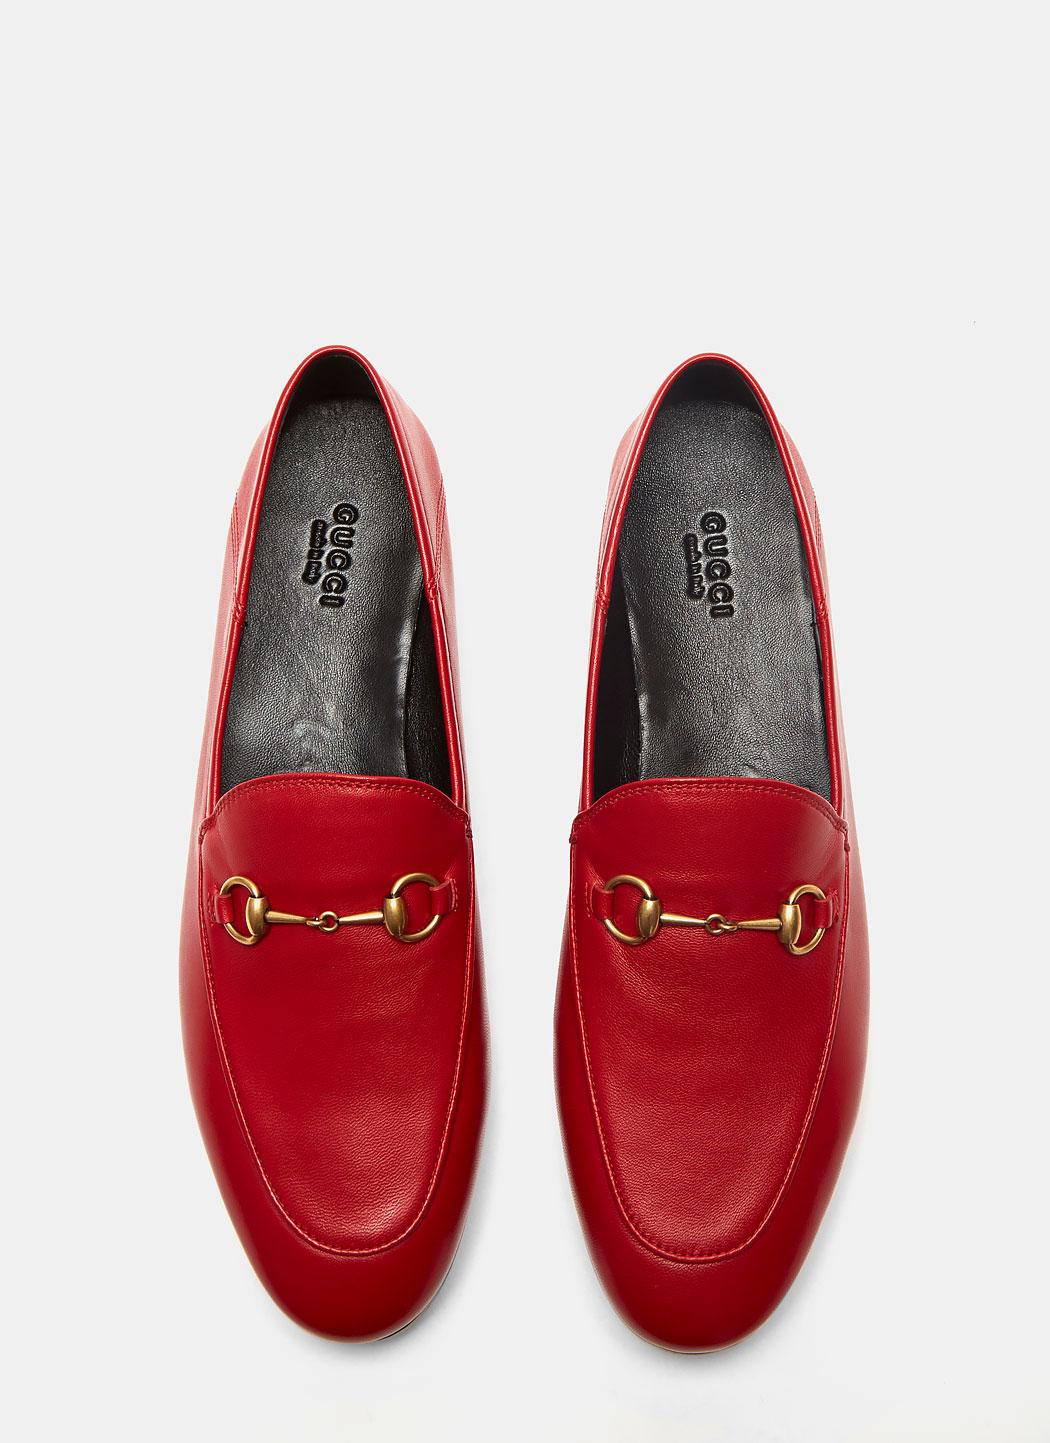 Lyst - Gucci Women's Jordaan Classic Leather Slip-on Loafers In Red in Red